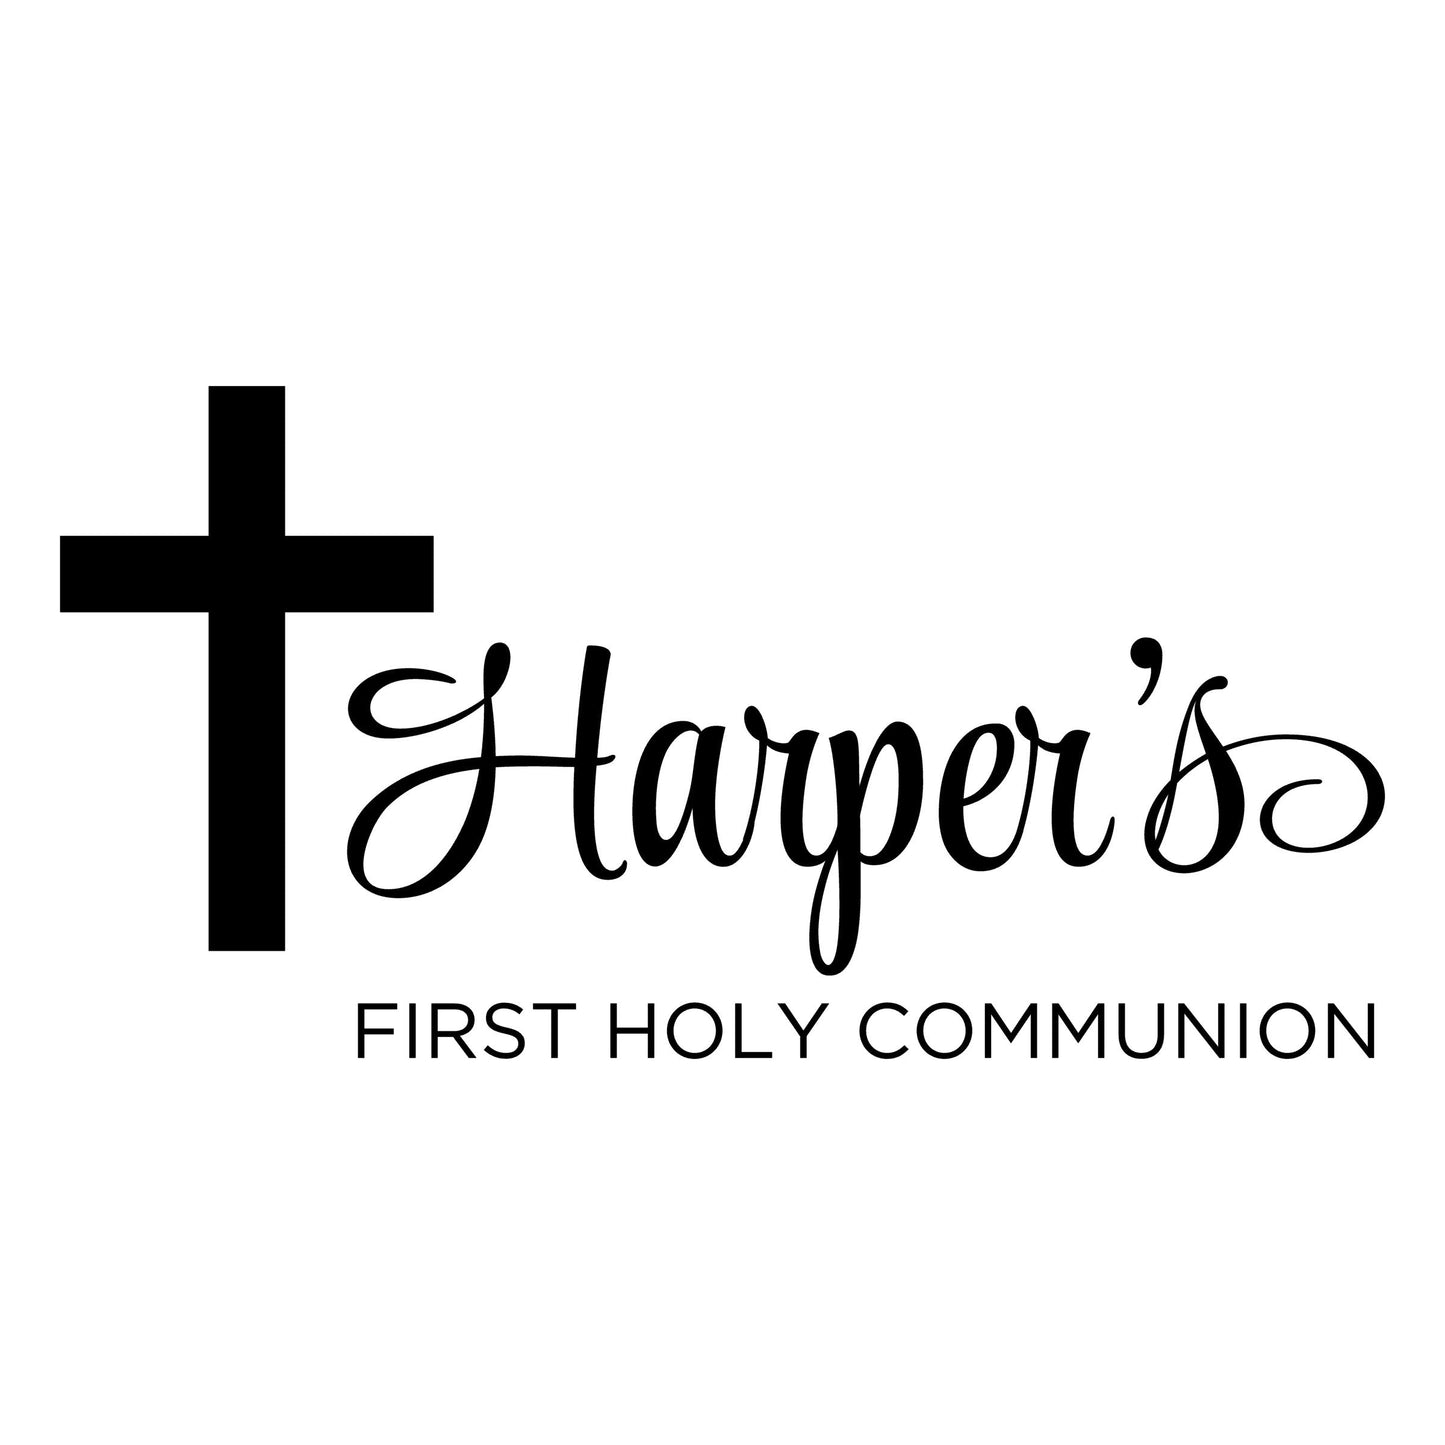 Personalized First Holy Communion Decor - Elegant Event Vinyl Lettering